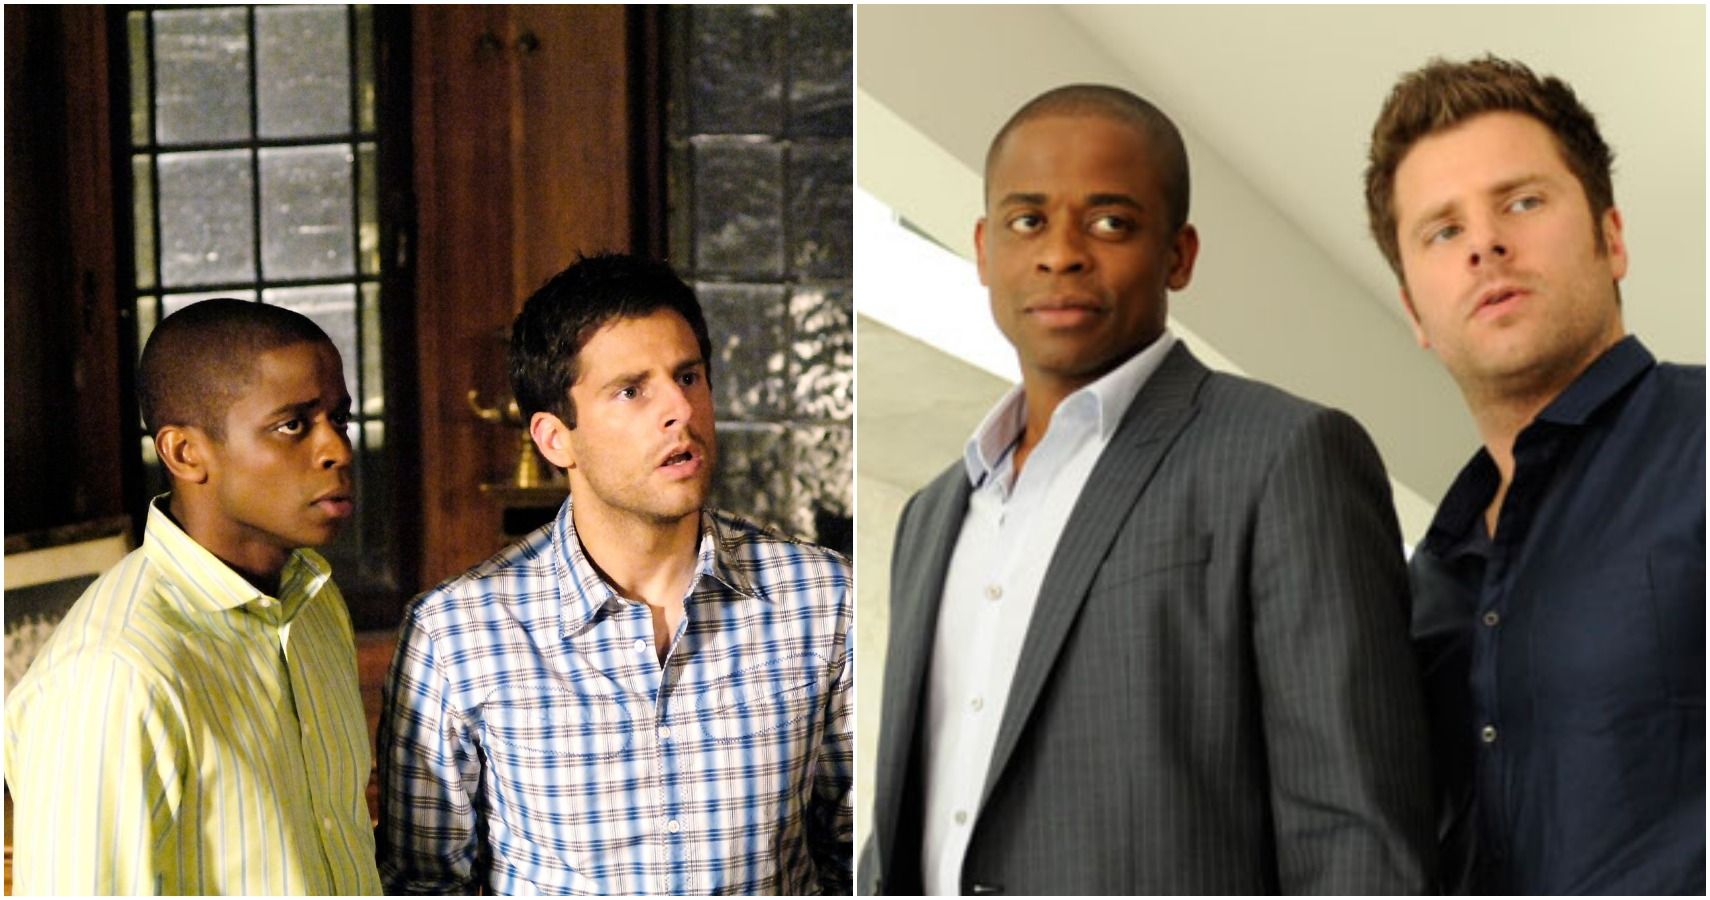 Dulé Hills 10 Best Movies And TV Shows (According To IMDb)